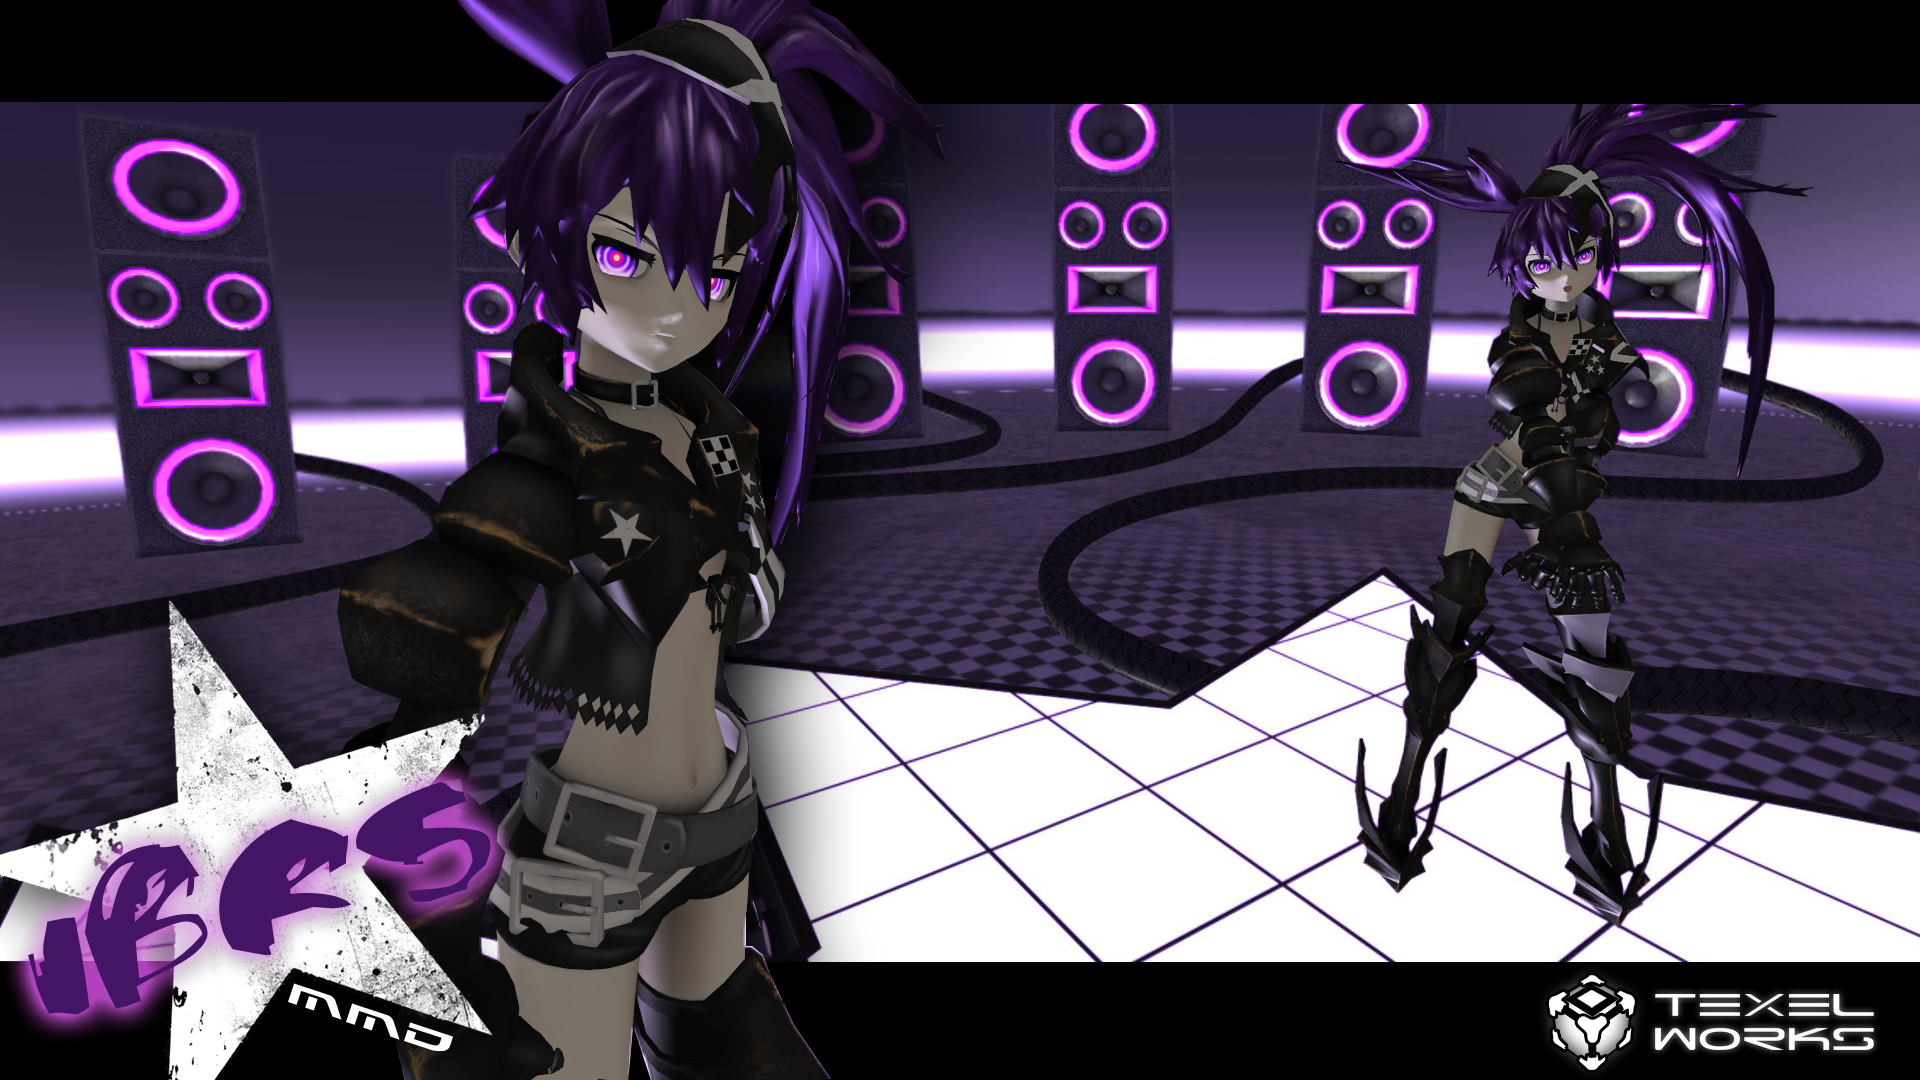 Mmd Ibrs Ova Digitrevx Ver2 Discontinued By On